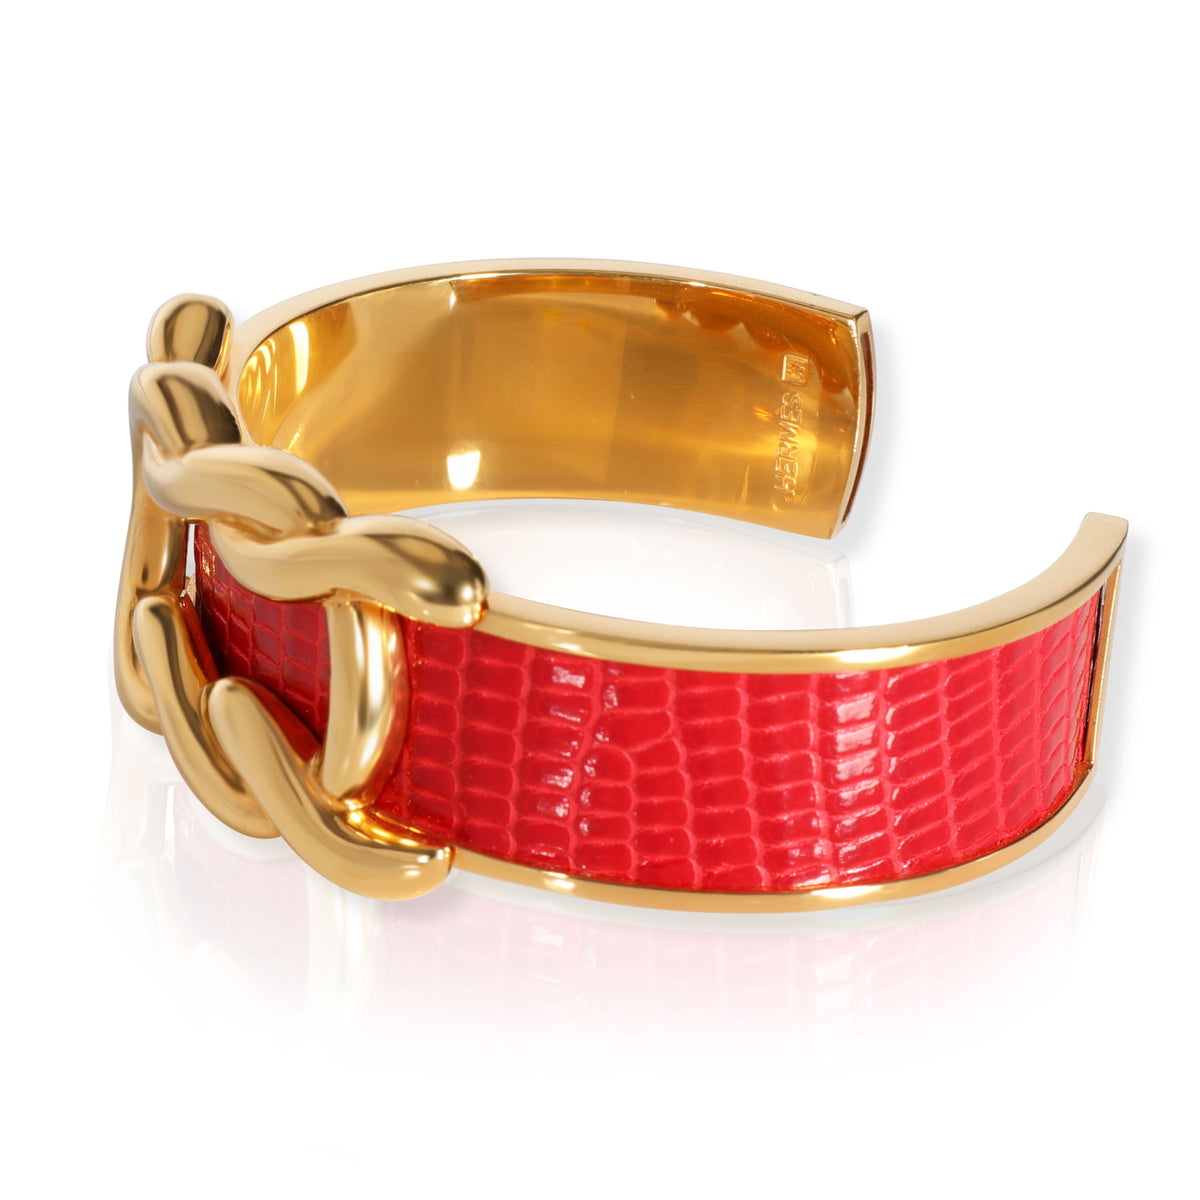 Vintage Hermès Gold-Plated Red Lizard Knot Cuff